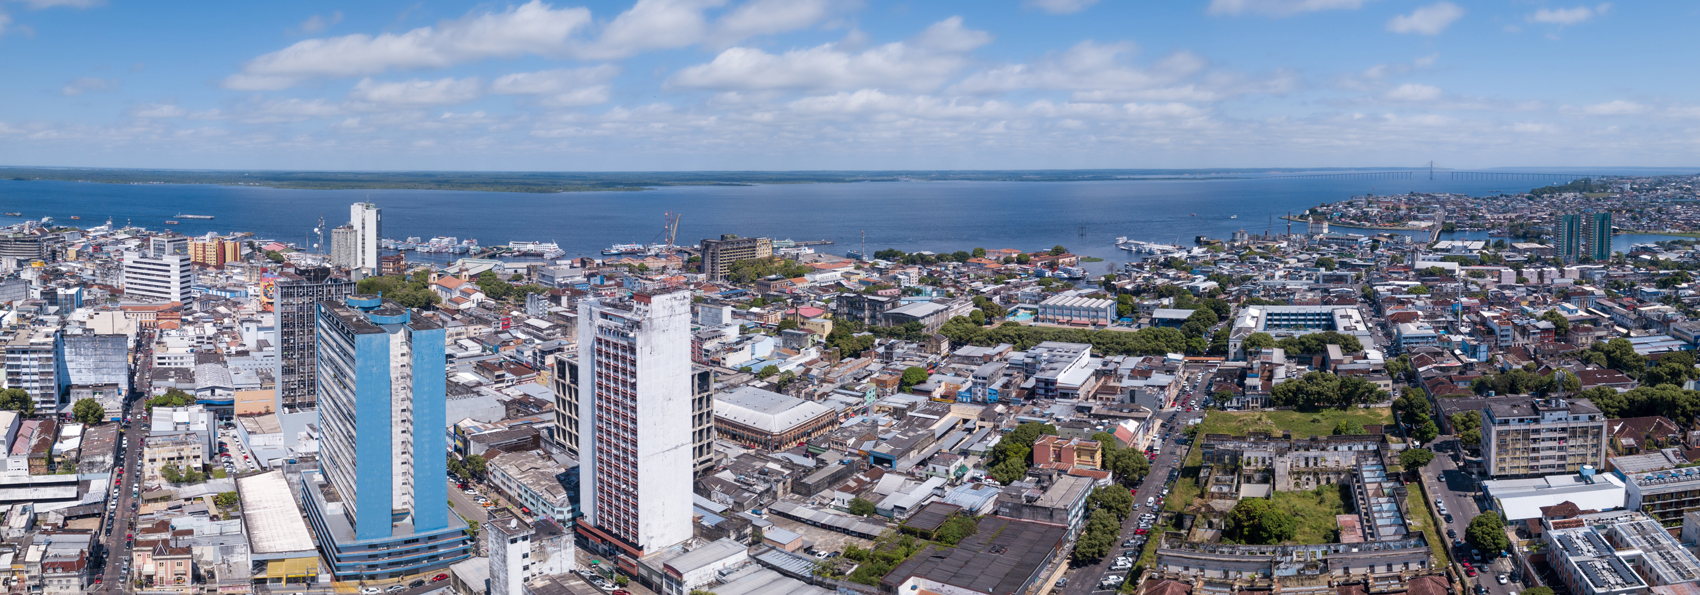 Manaus By